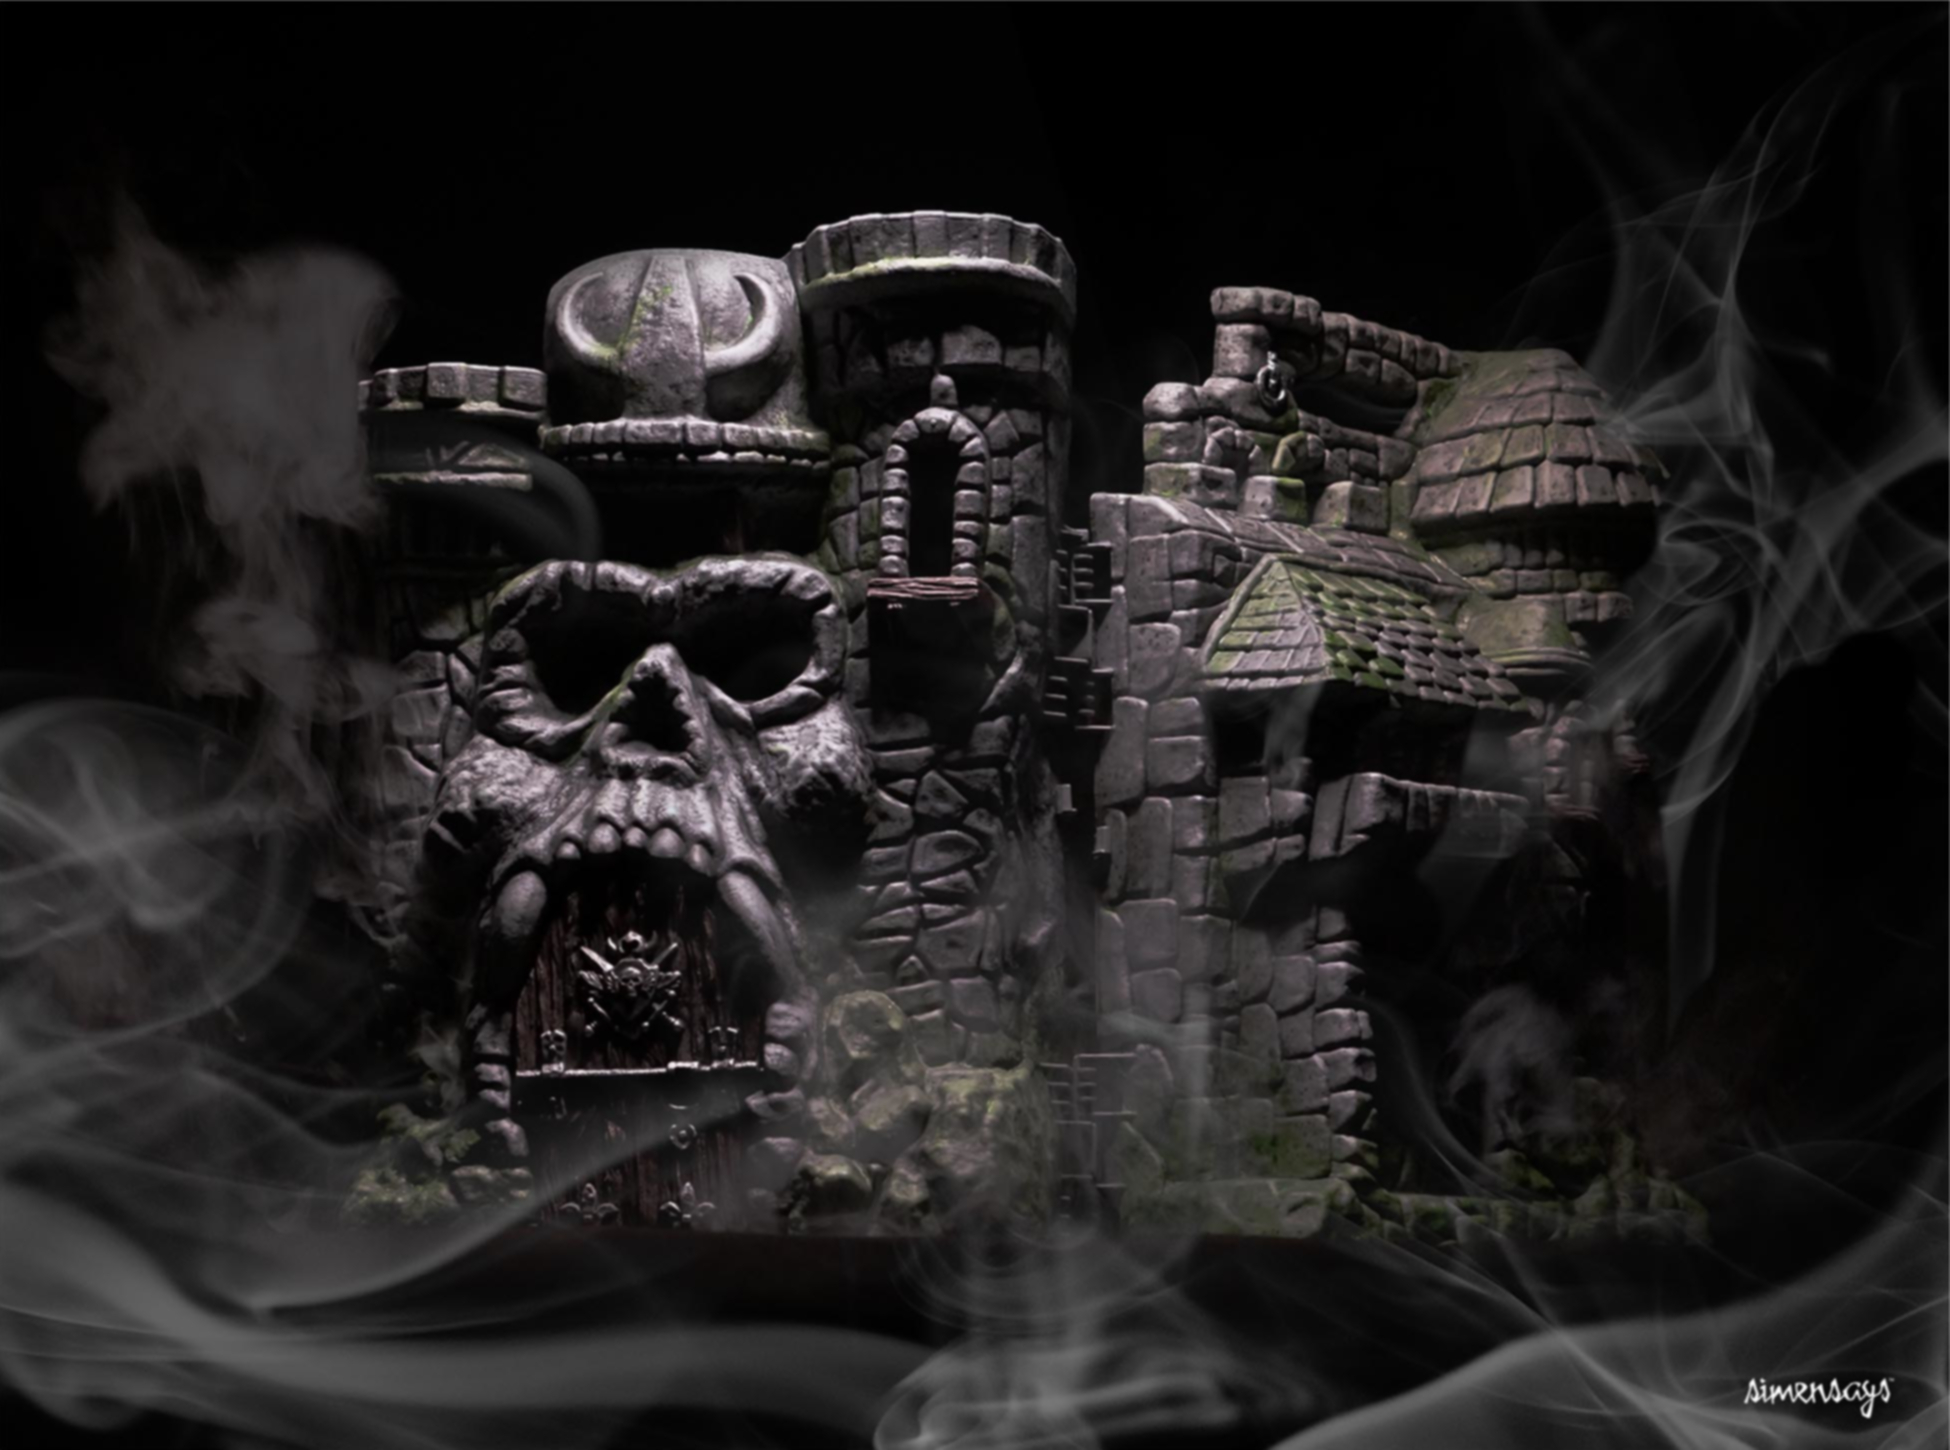 General 1950x1450 Masters of the Universe He-Man and the Masters of the Universe Castle Grayskull digital art watermarked